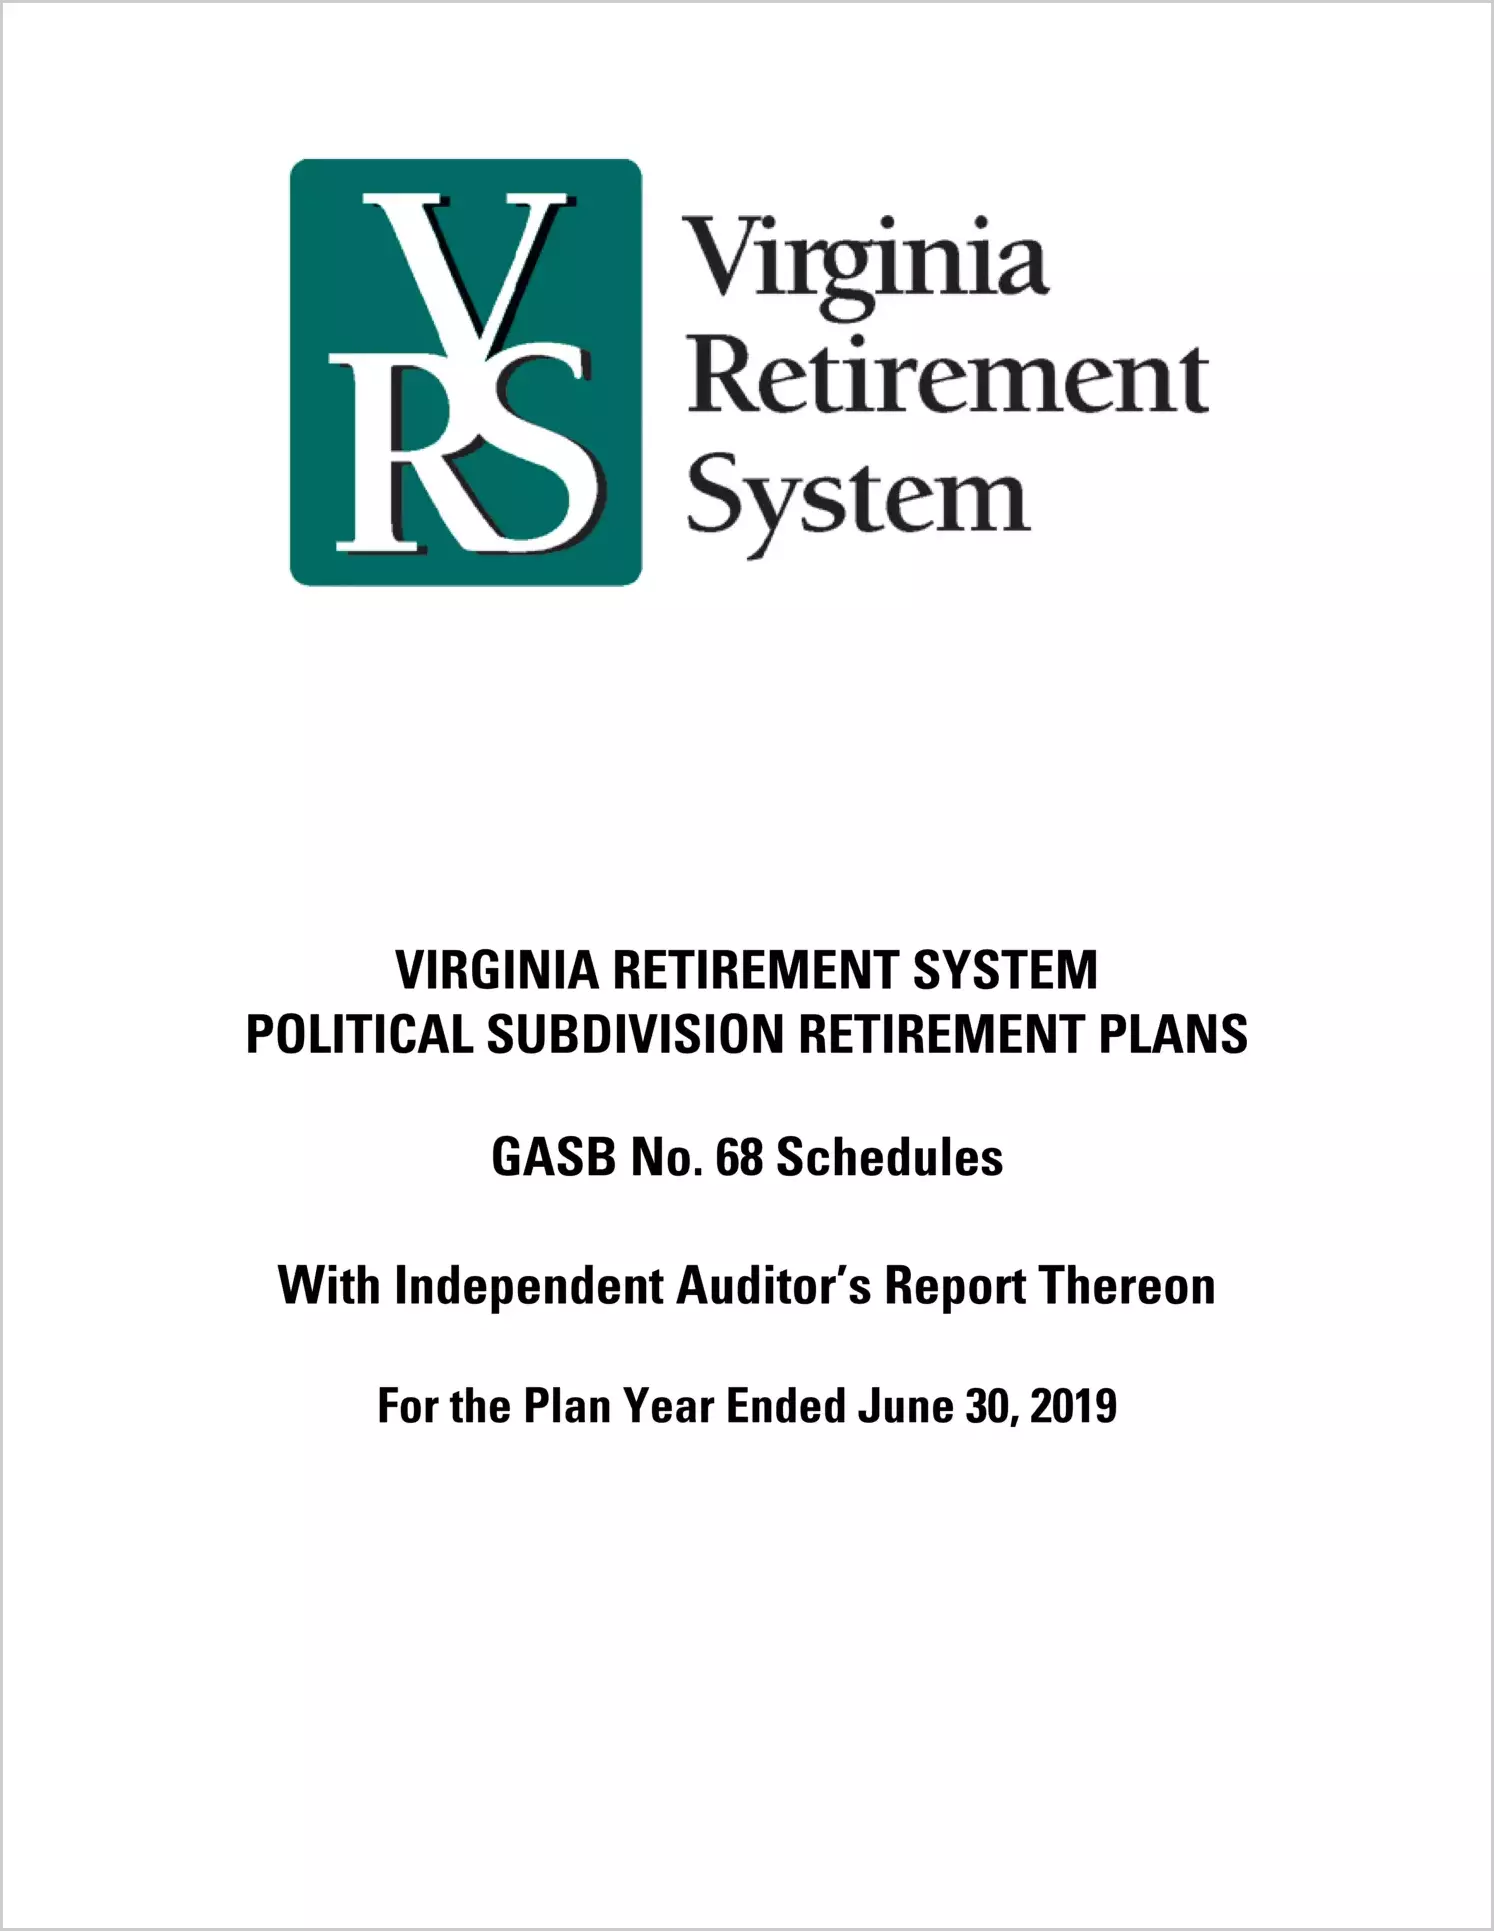 GASB 68 Schedule - Virginia Retirement System Political Subdivision Retirement Plans for the year ended June 30, 2019